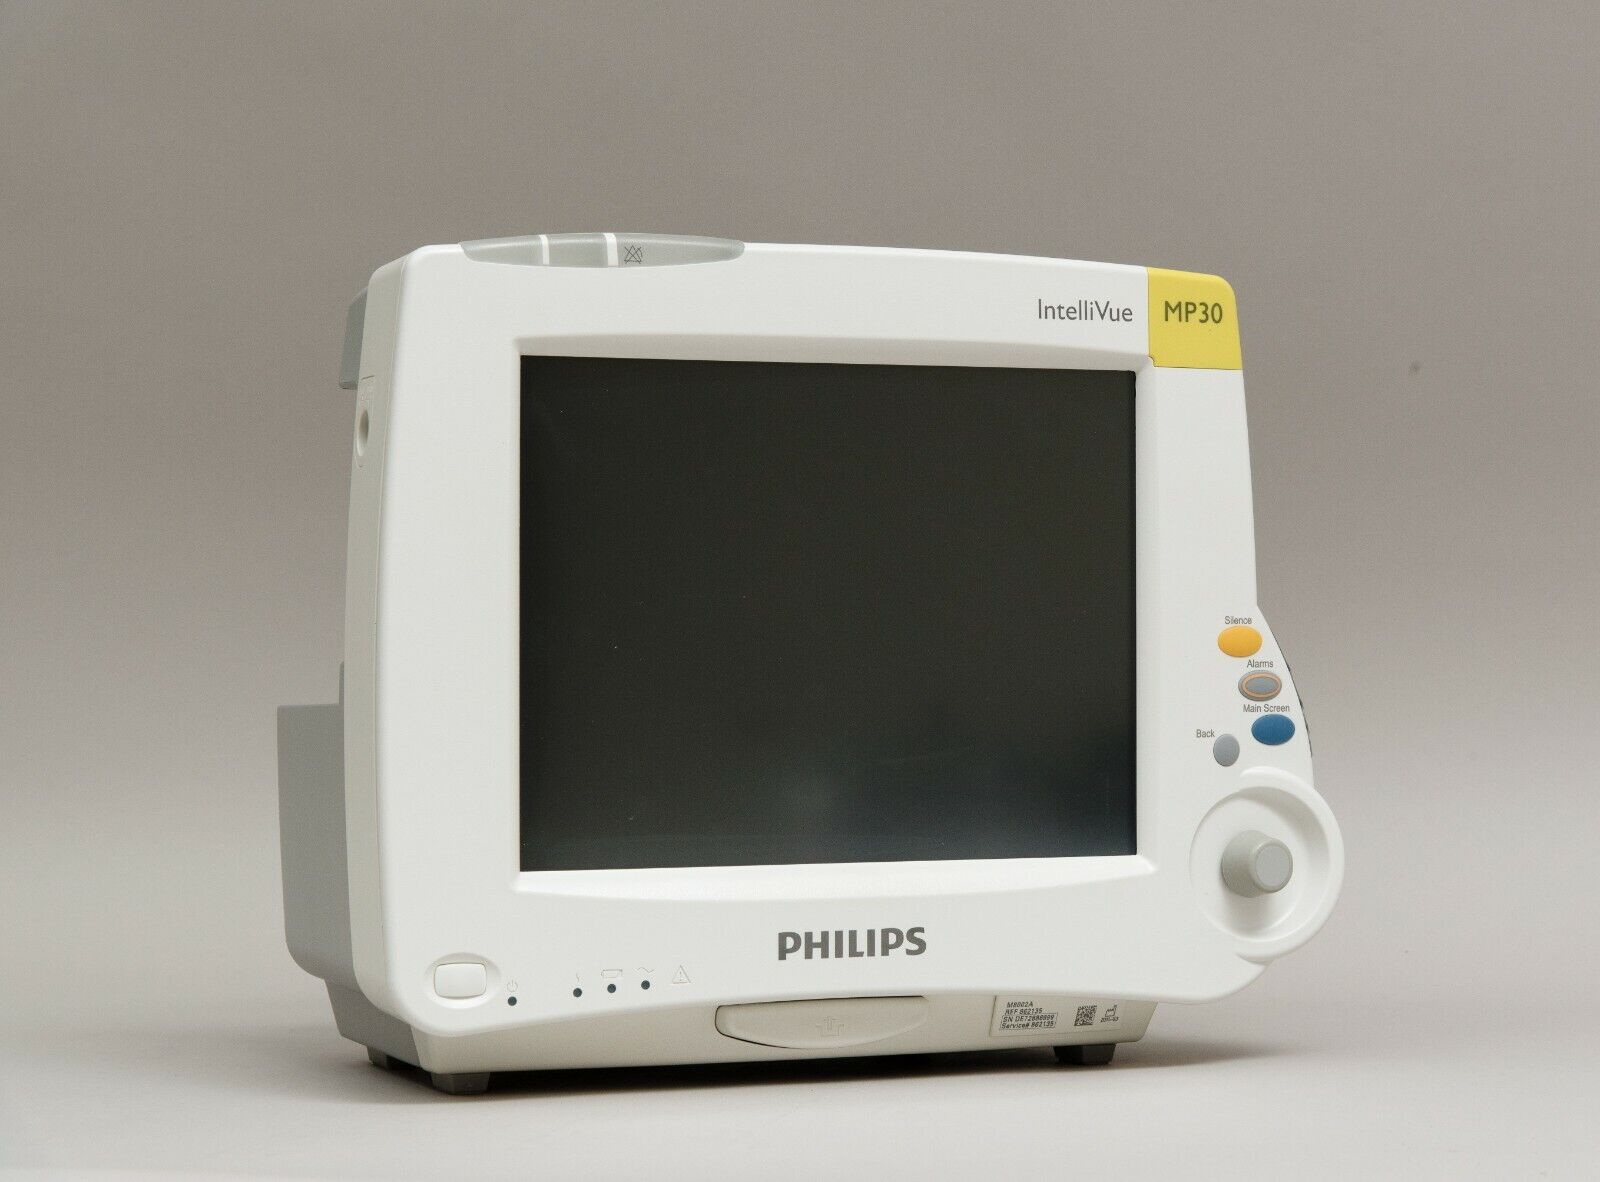 Lot of 5 Refurbished Philips IntelliVue MP30 Monitor  Available at Simon Medical Philips MP30 - фотография #7